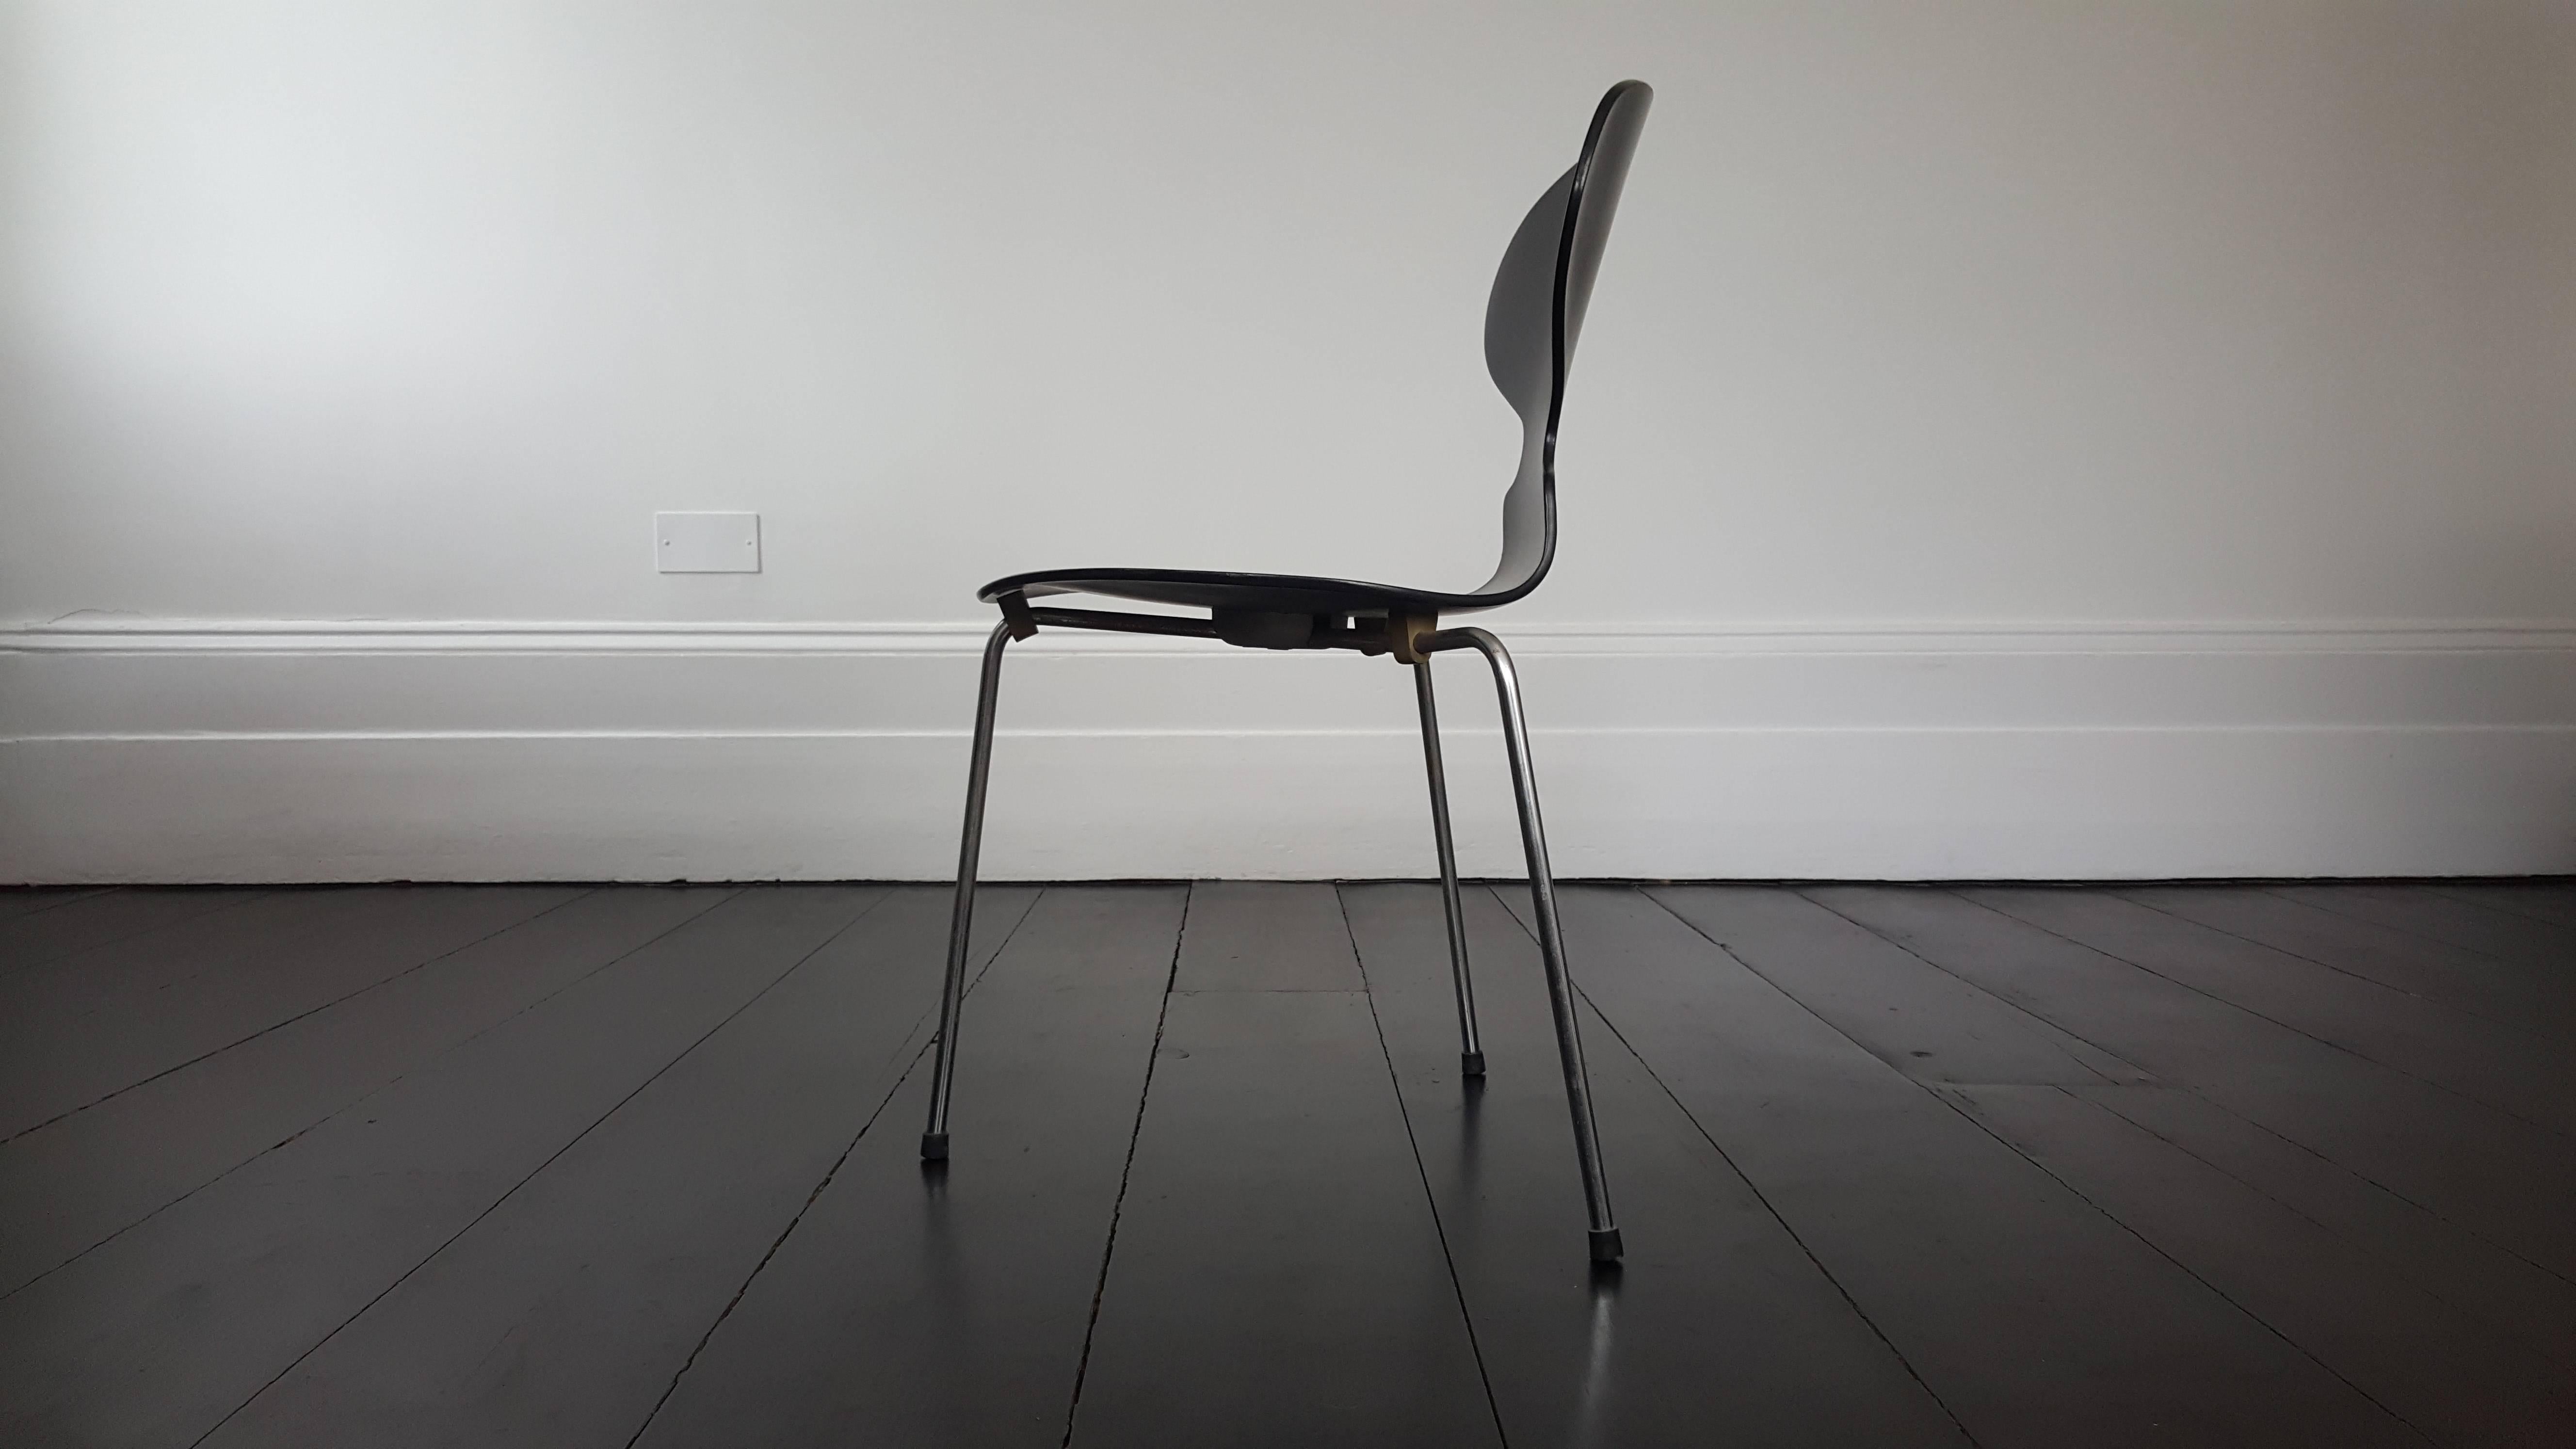 Iconic model 3100 'Ant' chair by Arne Jacobsen for Fritz Hansen.

Model 3100 'Ant' chairs were designed by Arne Jacobsen in 1952. This piece produced in 1965. Black lacquered bentwood on steel frame.

Condition: Wear commensurate with age and use.